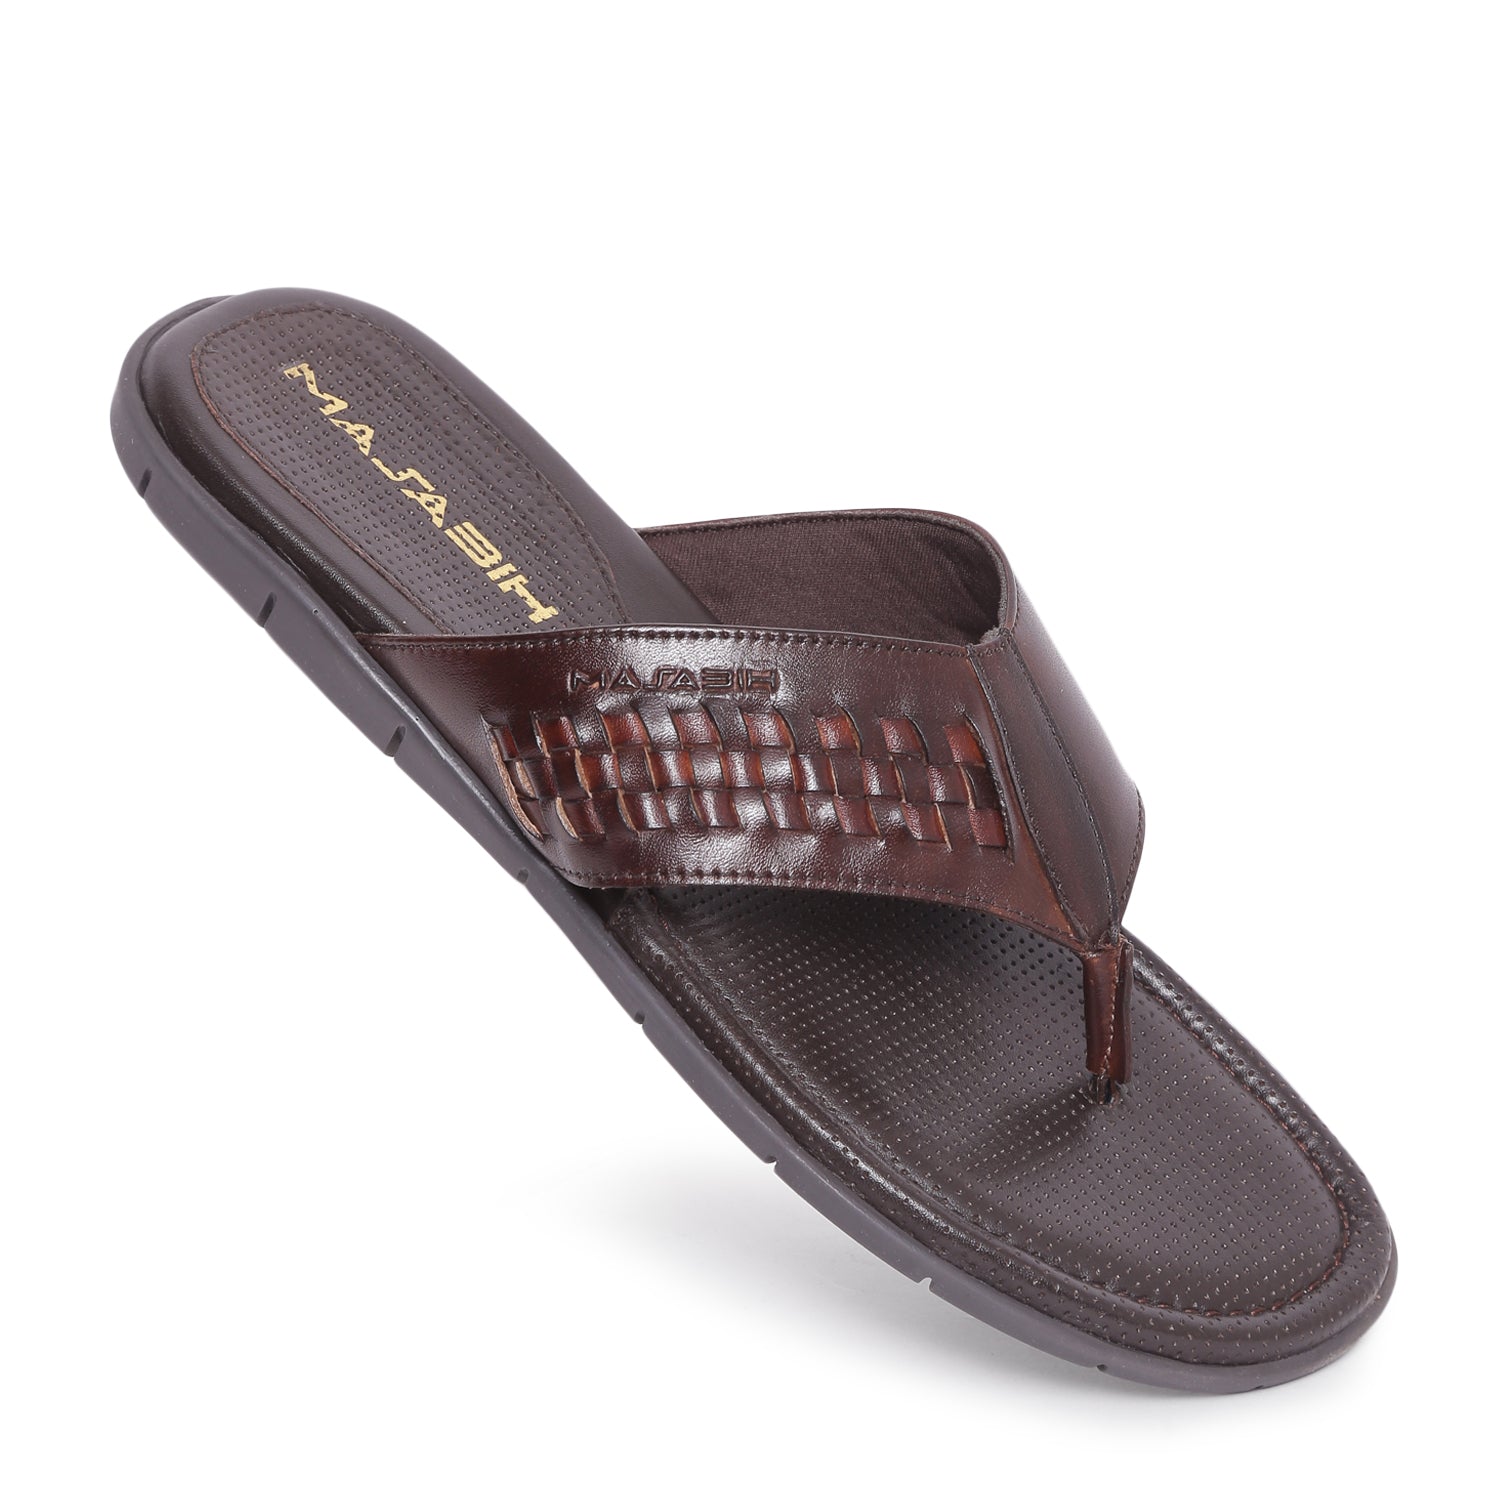 MASABIH Geniune Leather Soft Brown / Tan Color modern lace thong sandals for Mens